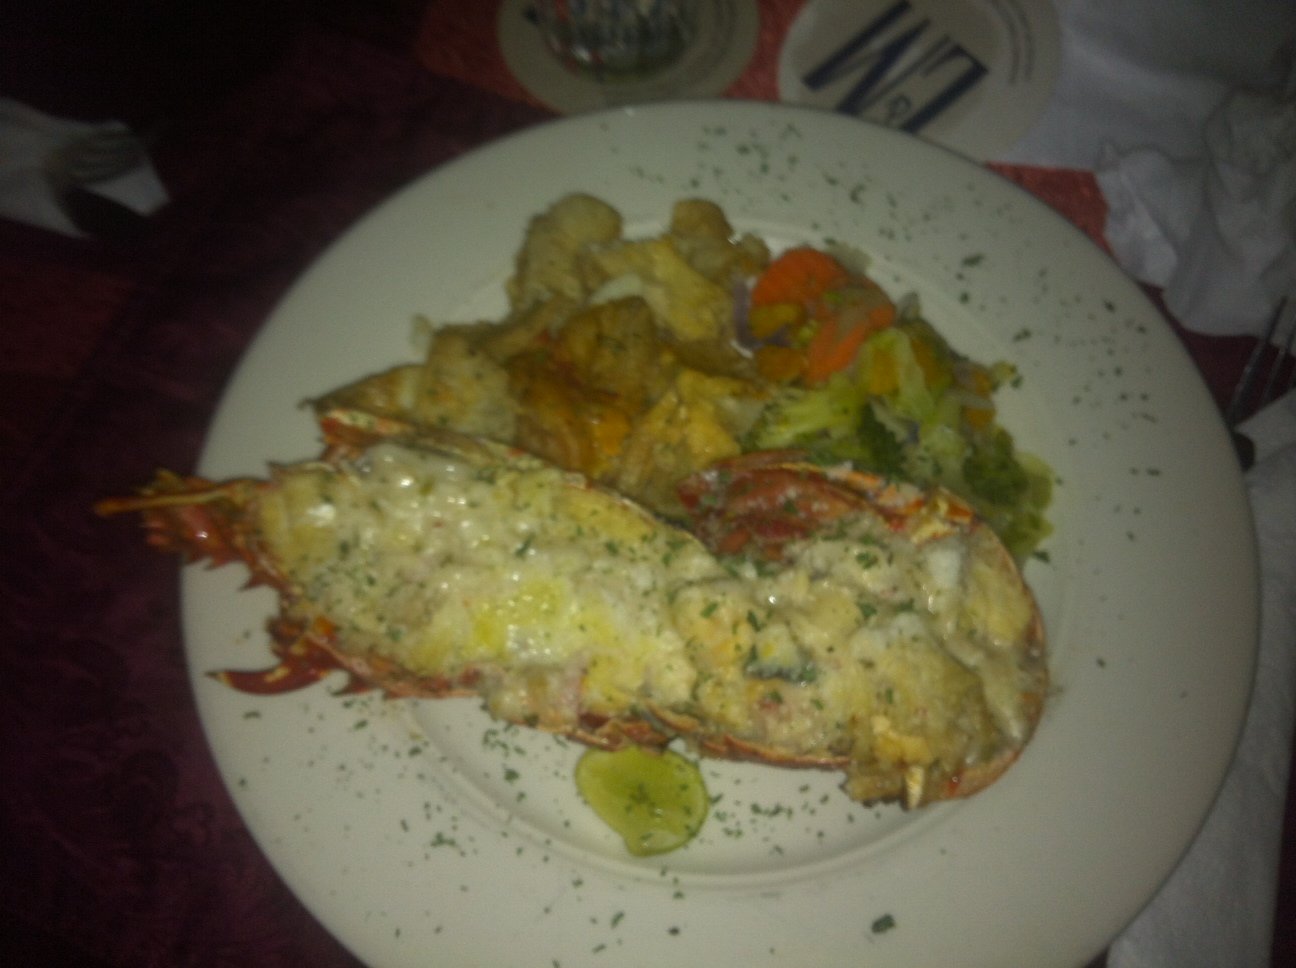 Great Lobster for 20 USD